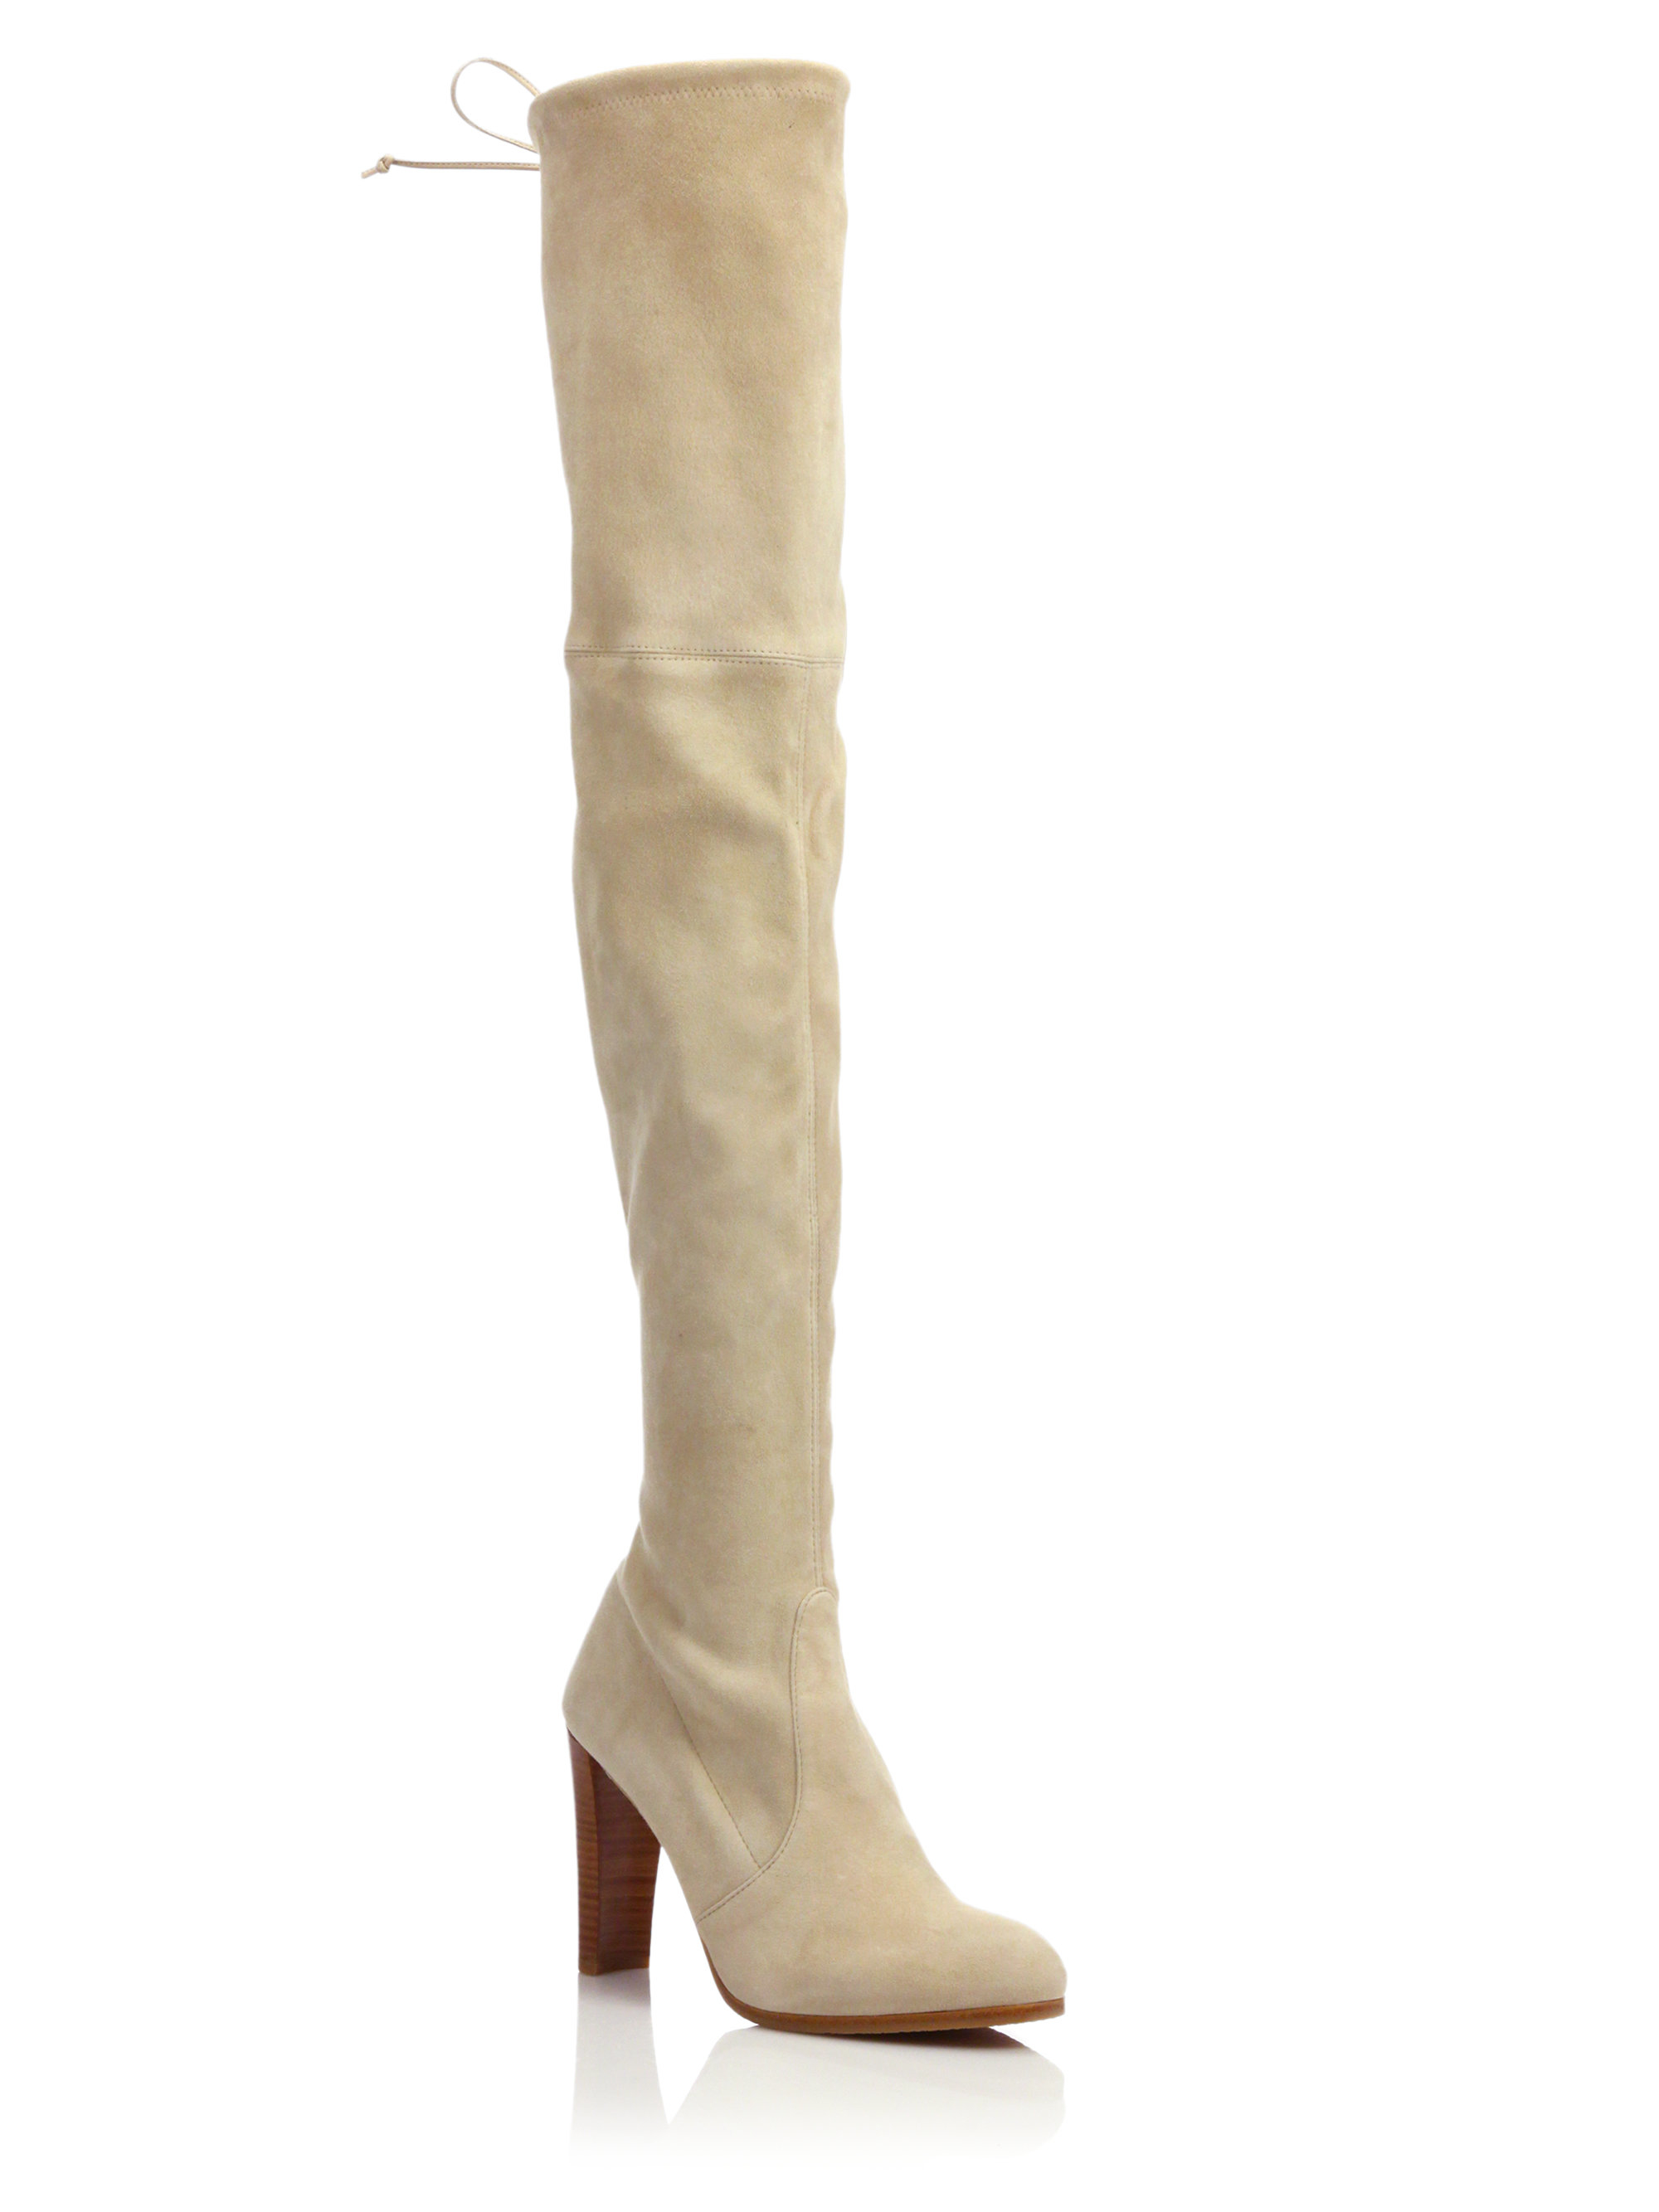 Stuart weitzman Highland Suede Over-The-Knee Boots in Brown | Lyst